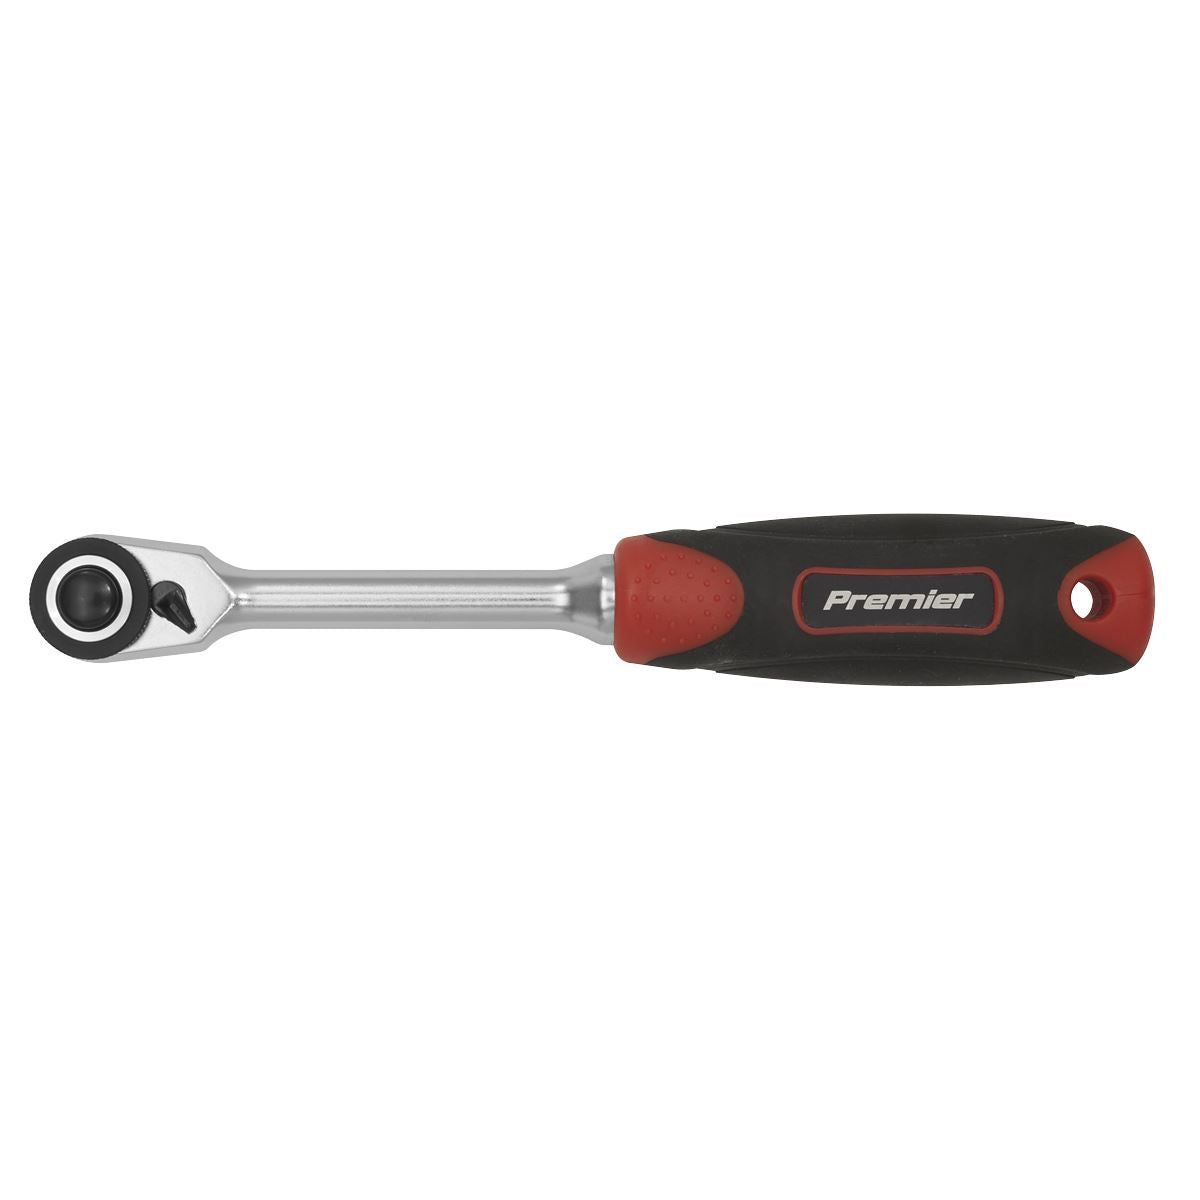 Sealey Compact Head Ratchet Wrench 1/4"Sq Drive - Platinum Series AK8987